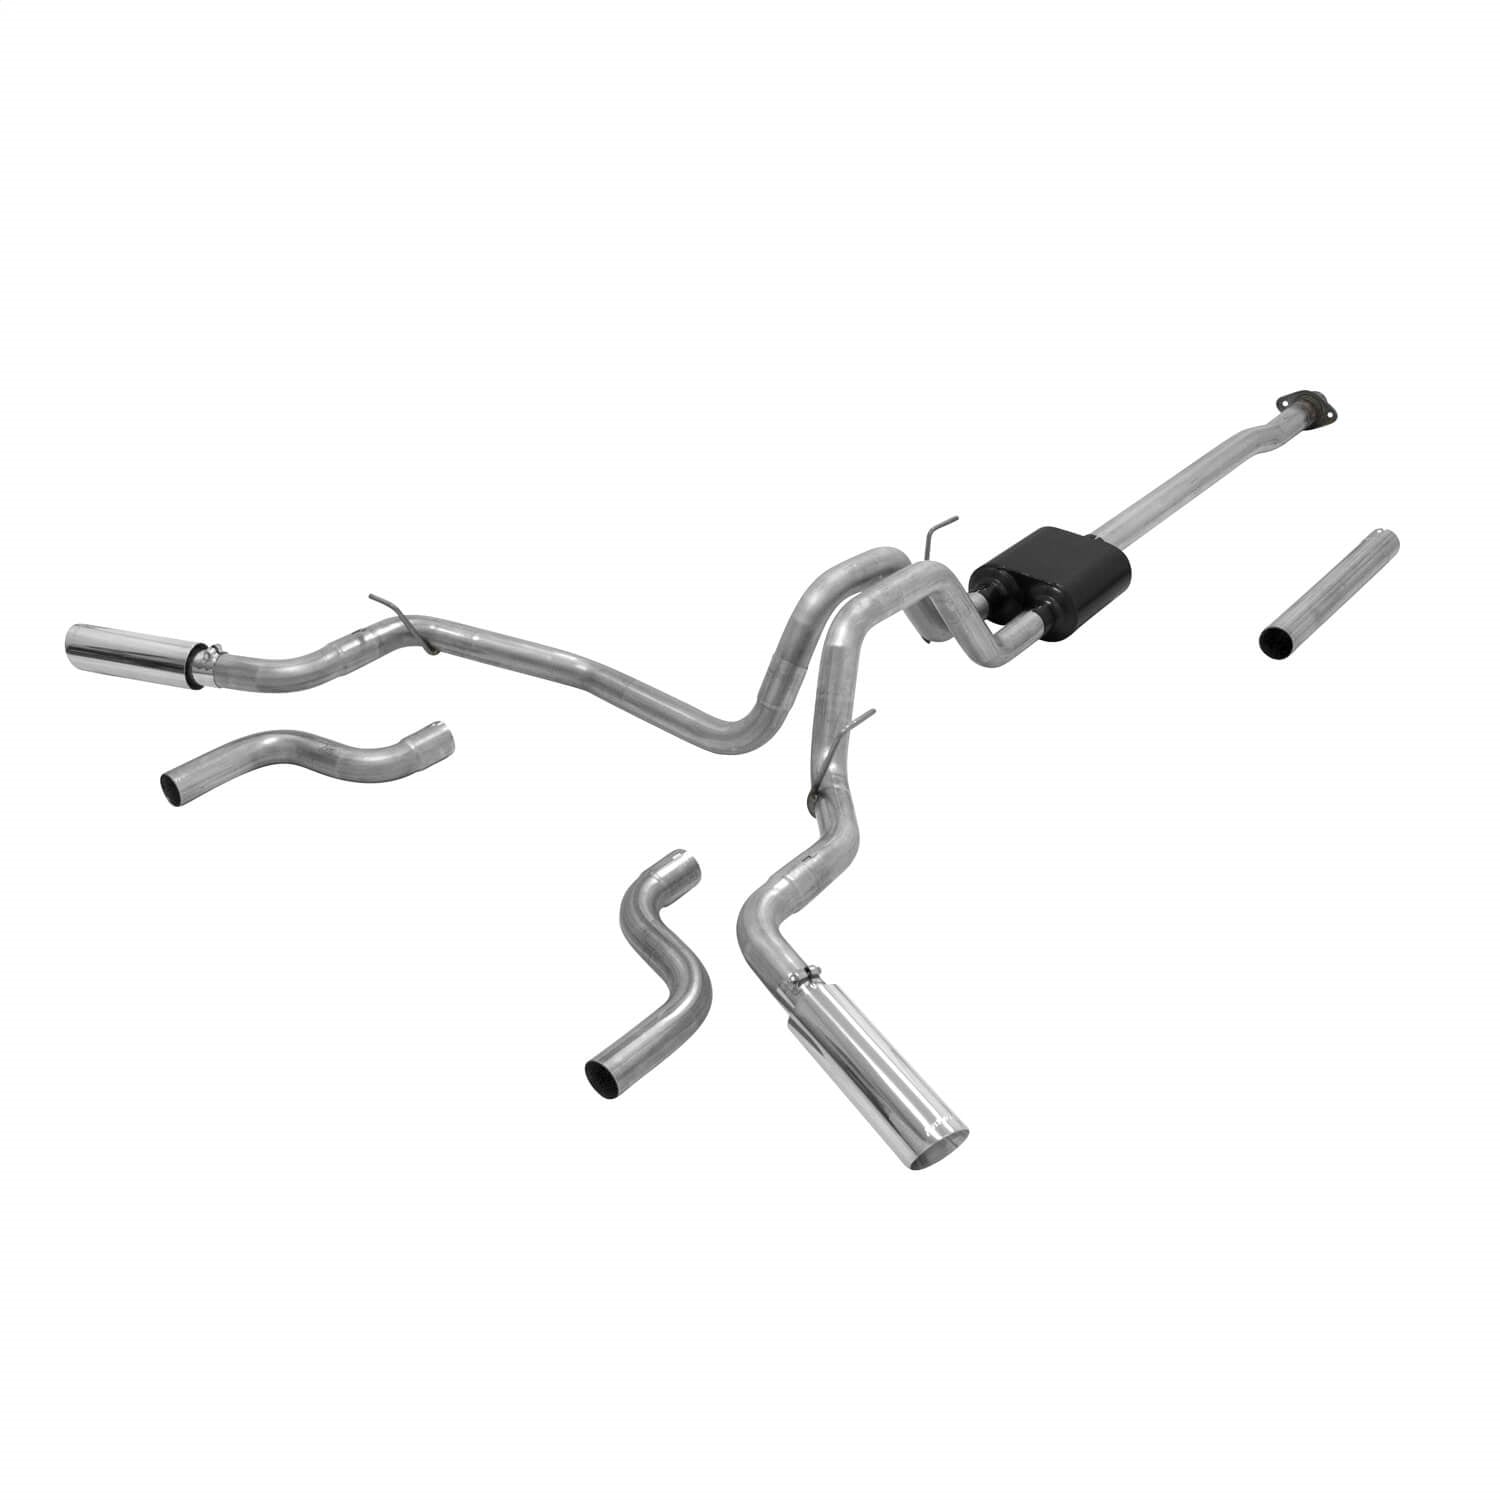 Flowmaster 817725 American Thunder Cat Back Exhaust System Fits 15-20 F-150